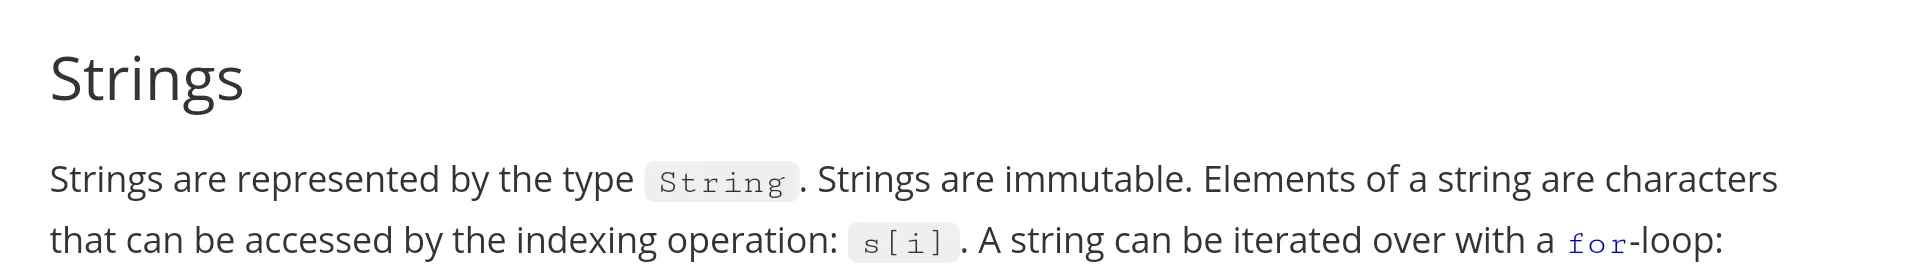 String is immutable